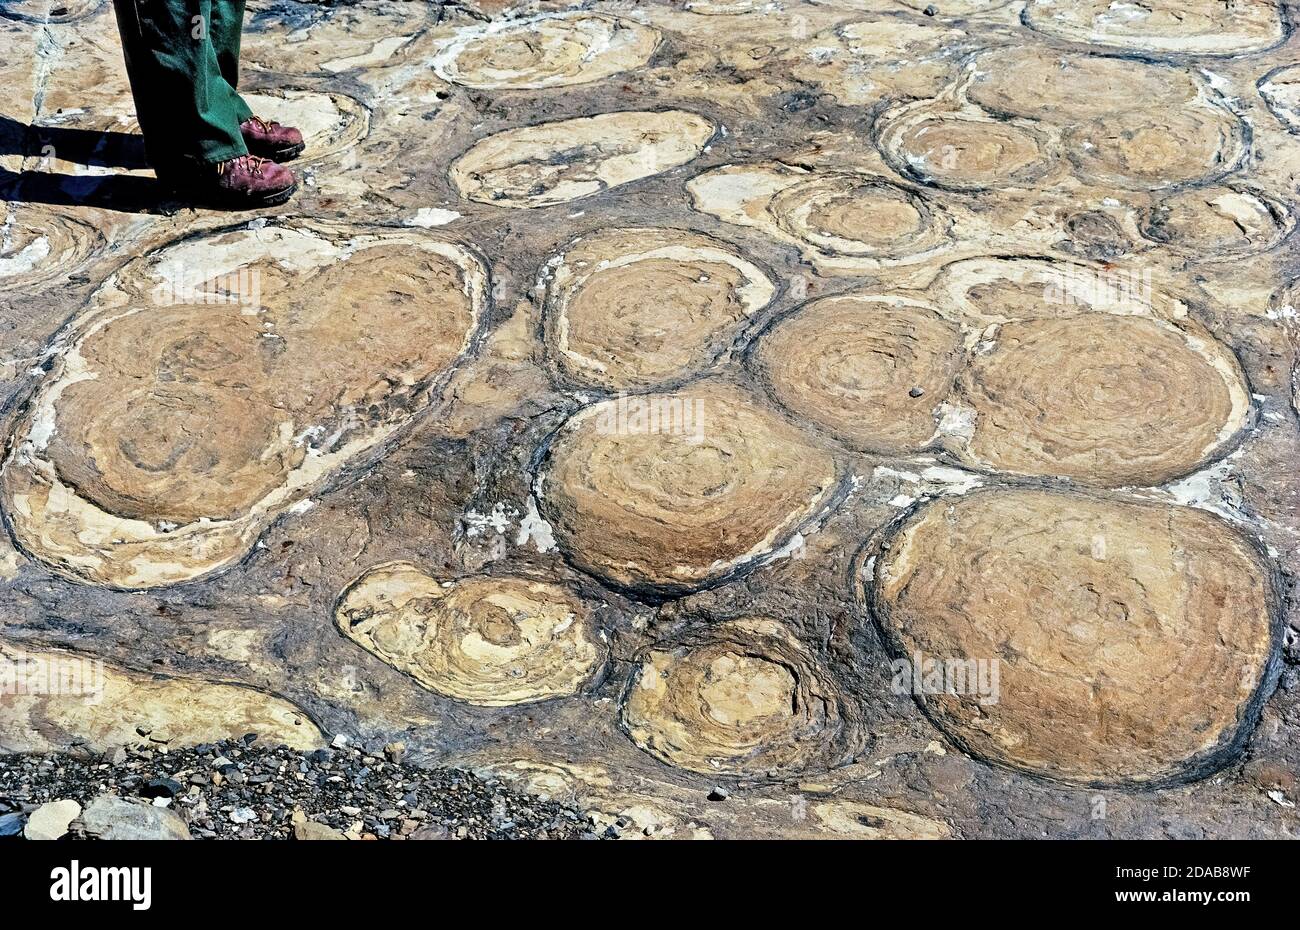 A park ranger leads visitors to ancient fossil formations known as stromatolites during a guided nature tour of Glacier National Park, a vast wilderness preserve in northwestern Montana, USA. These round rock-like structures were formed in shallow waters as long ago as 3 billion years when living microorganisms called cyanobacteria trapped layers of sediment. Geological features like stromatolites are among the many natural attractions for visitors to this pristine scenic region that was established as America's 10th national park in 1910. Stock Photo